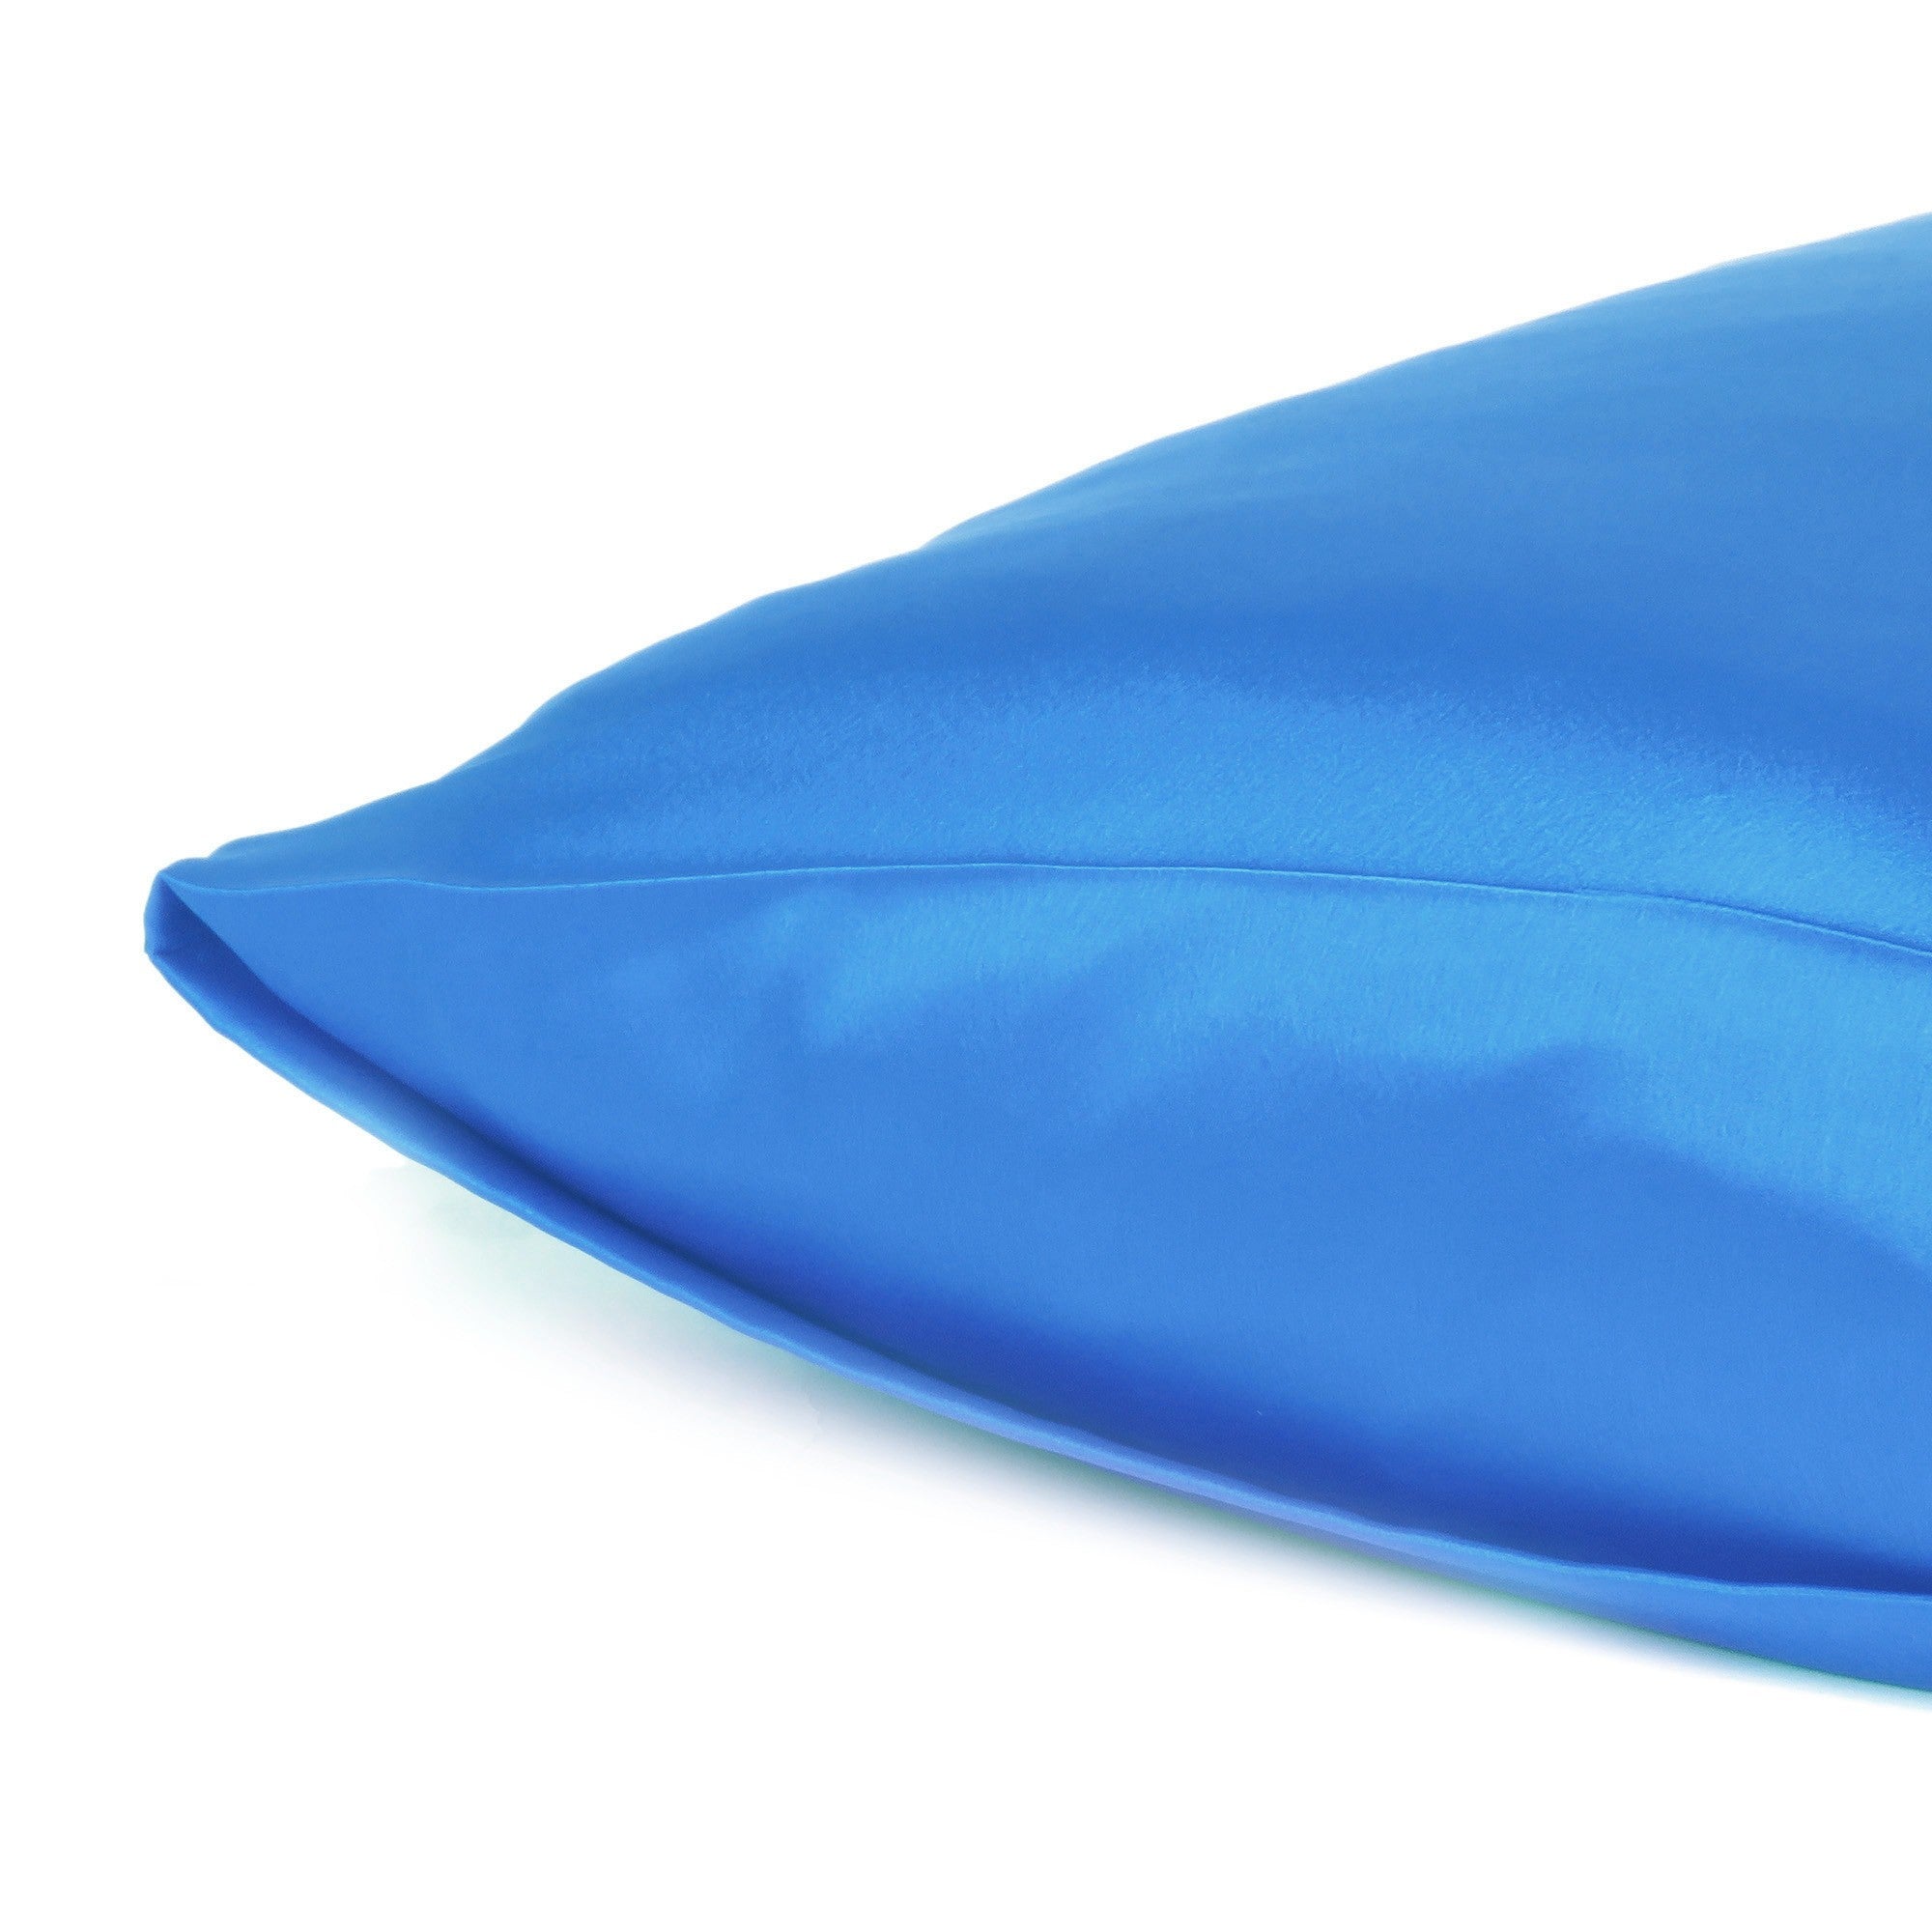 Set of Two Bright Blue Dreamy Silky Satin King Pillowcases